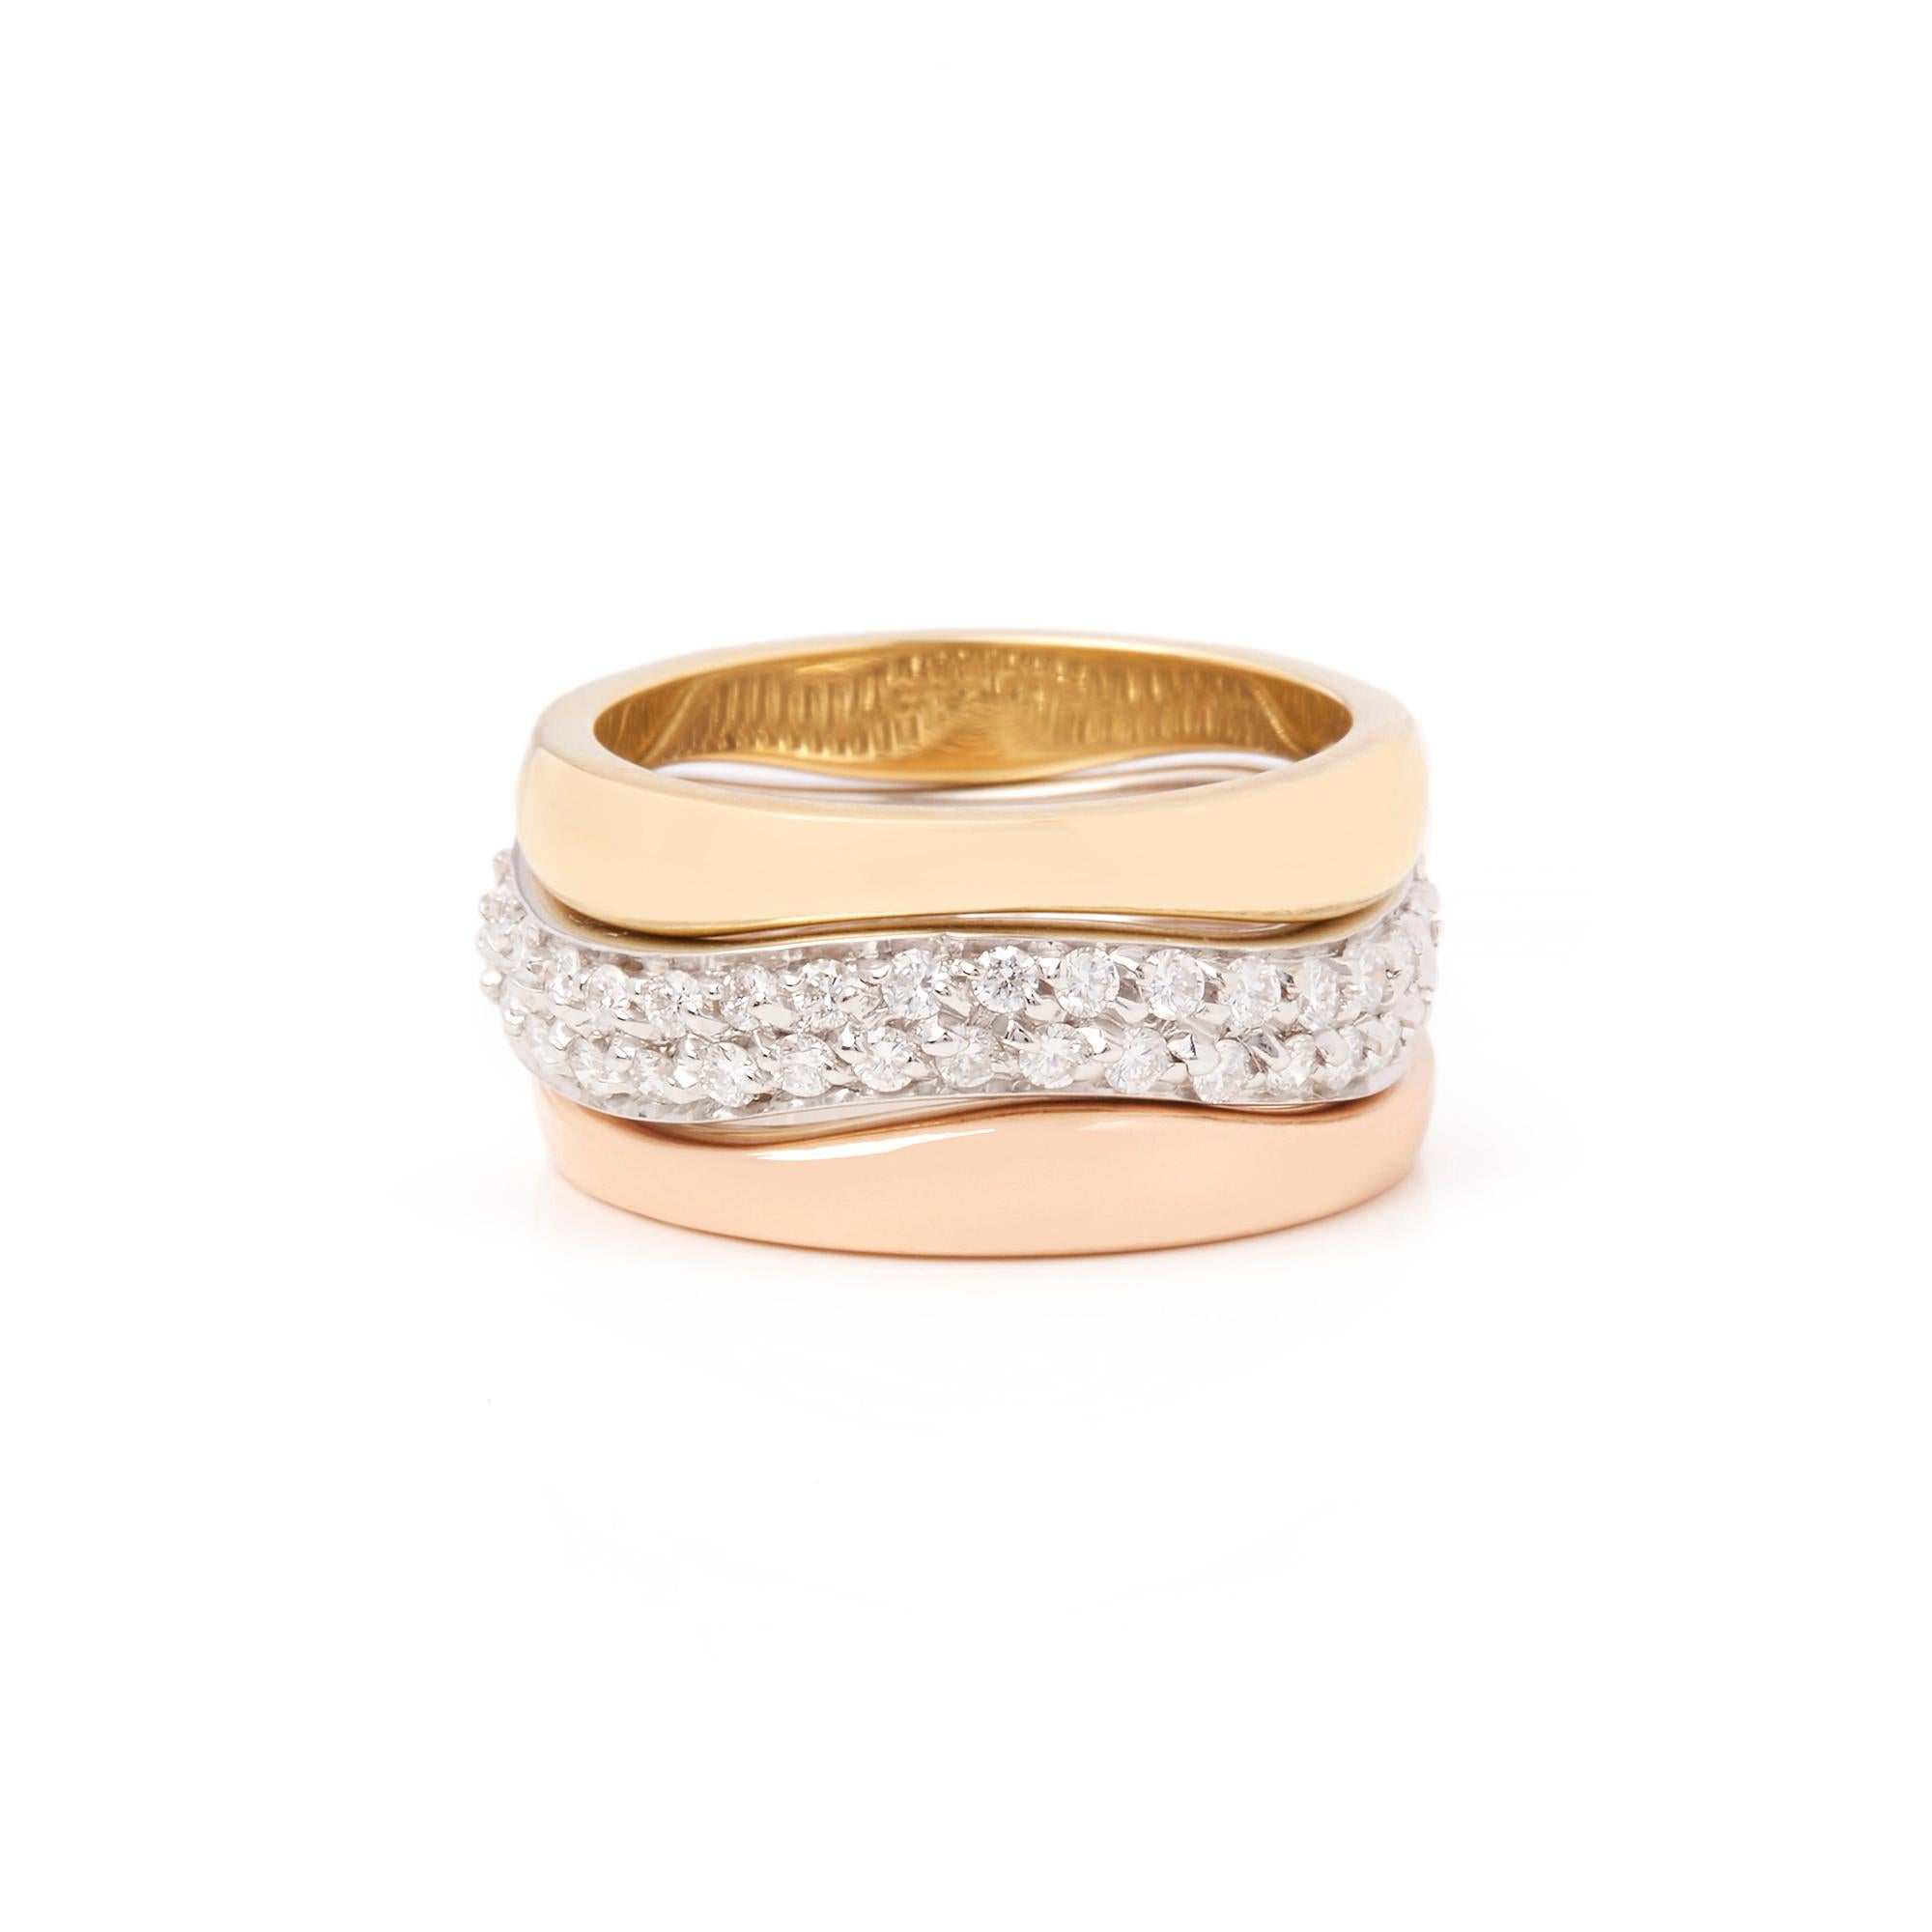 Modern Cartier 18 Karat Yellow, White and Rose Gold Diamond Stackable Rings